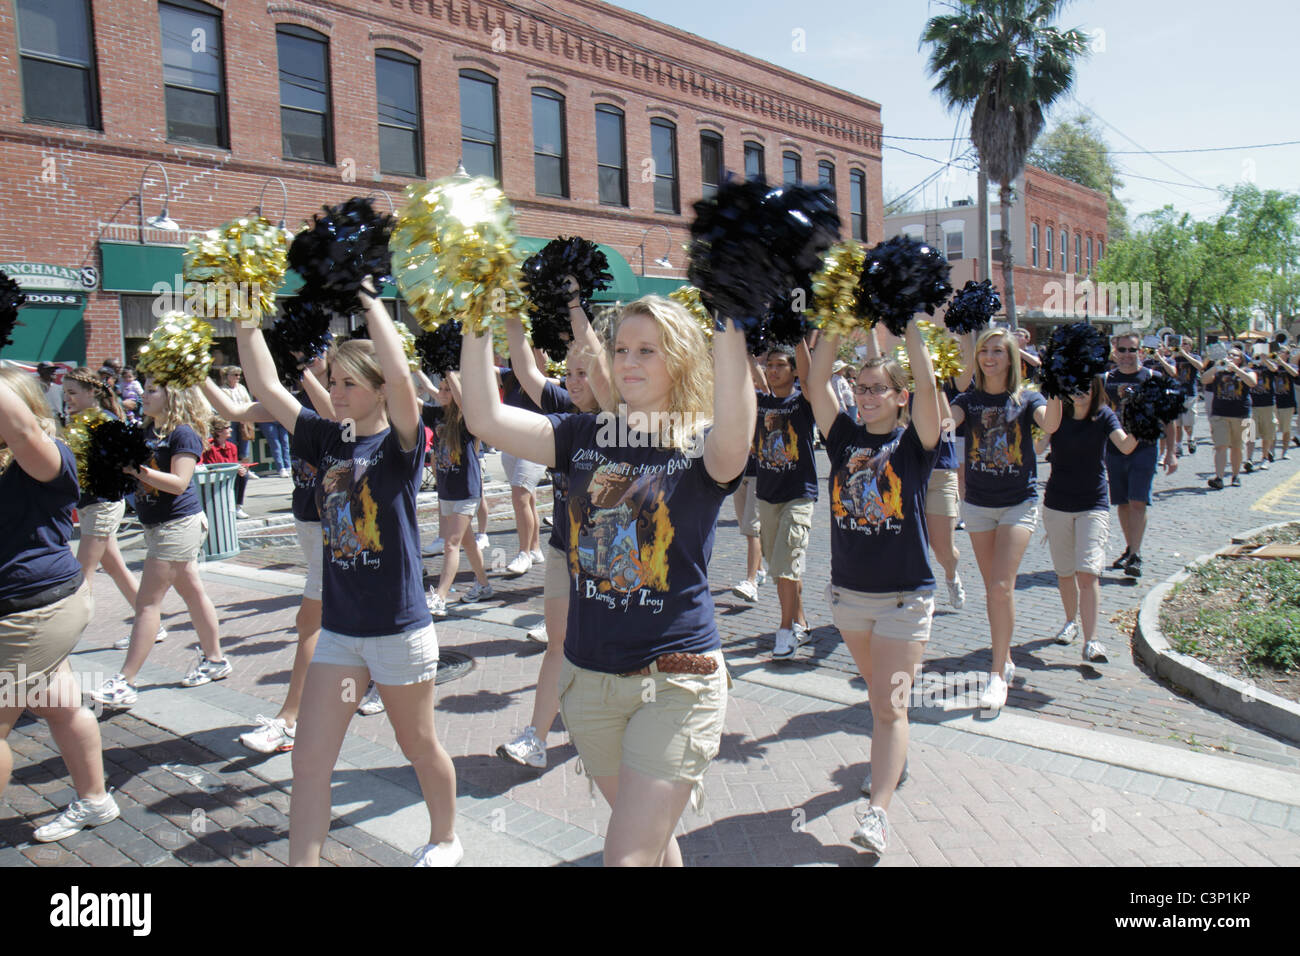 Plant City Florida,South Evers Street,Florida Strawberry Festival,Grand Parade,high school pom dance squad,girl girls,youngster youngsters youth youth Stock Photo